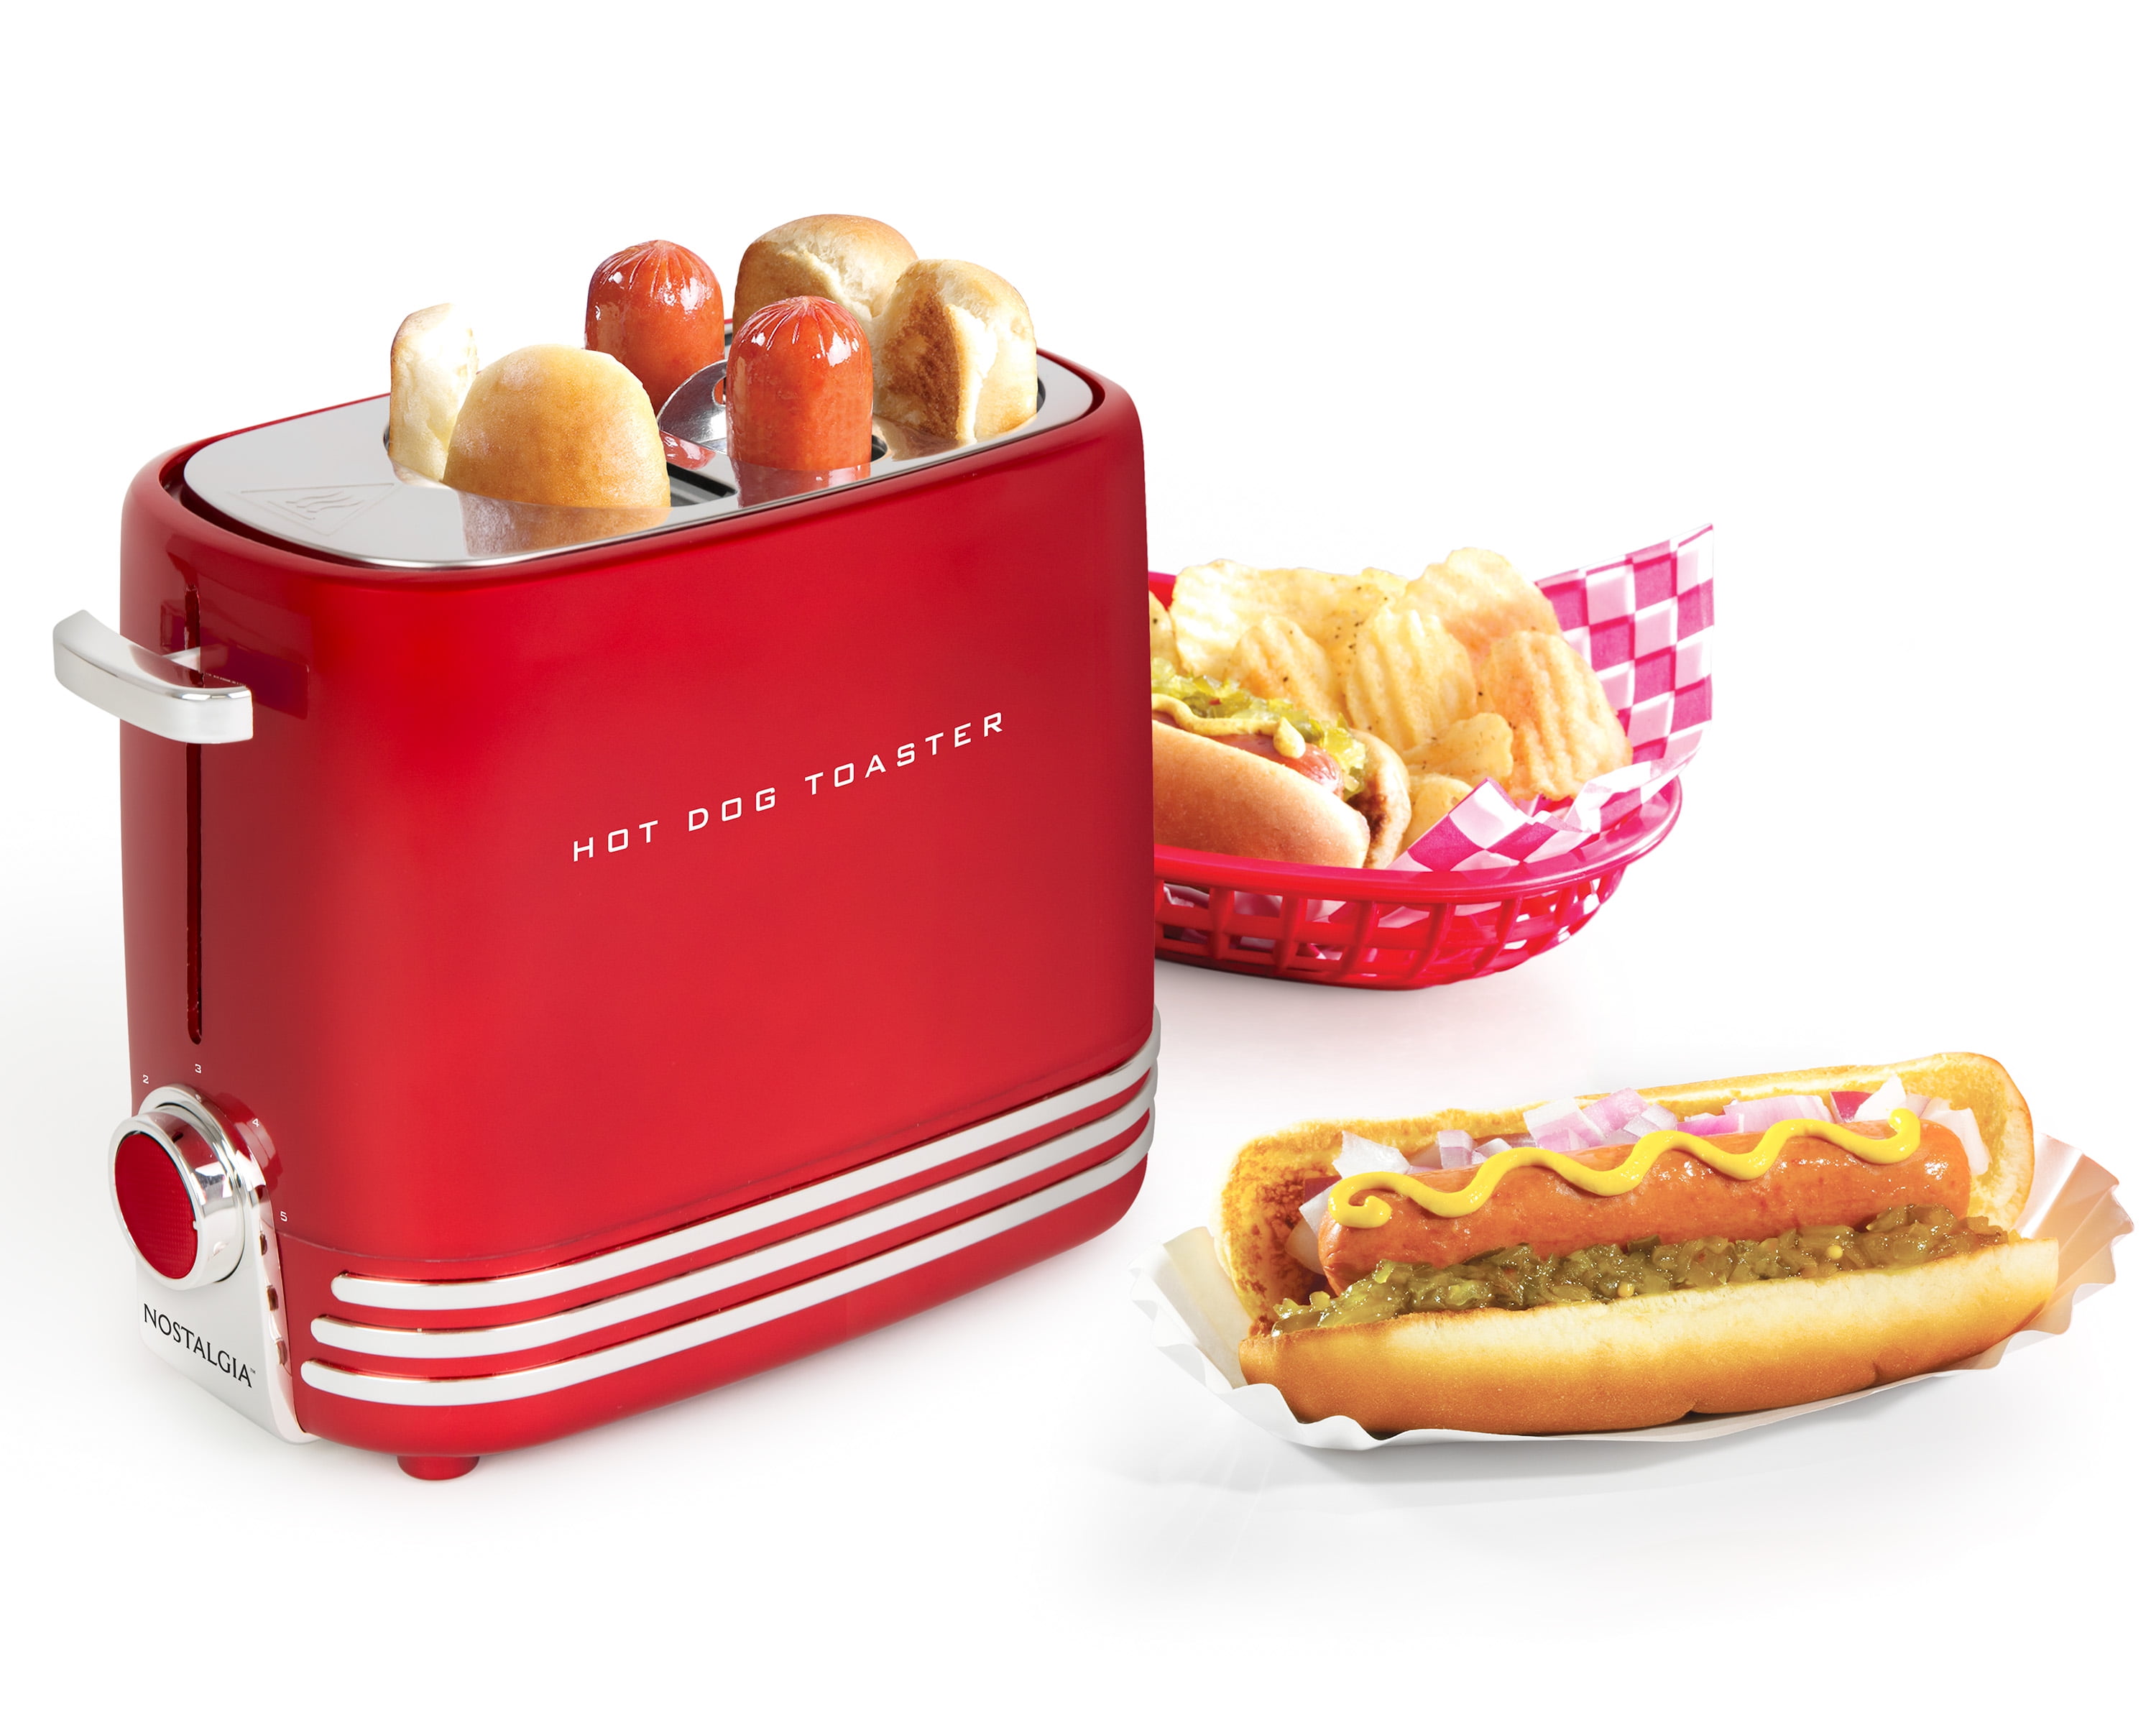 There's a Hot Dog Toaster That'll Also Toast Your Buns For Super